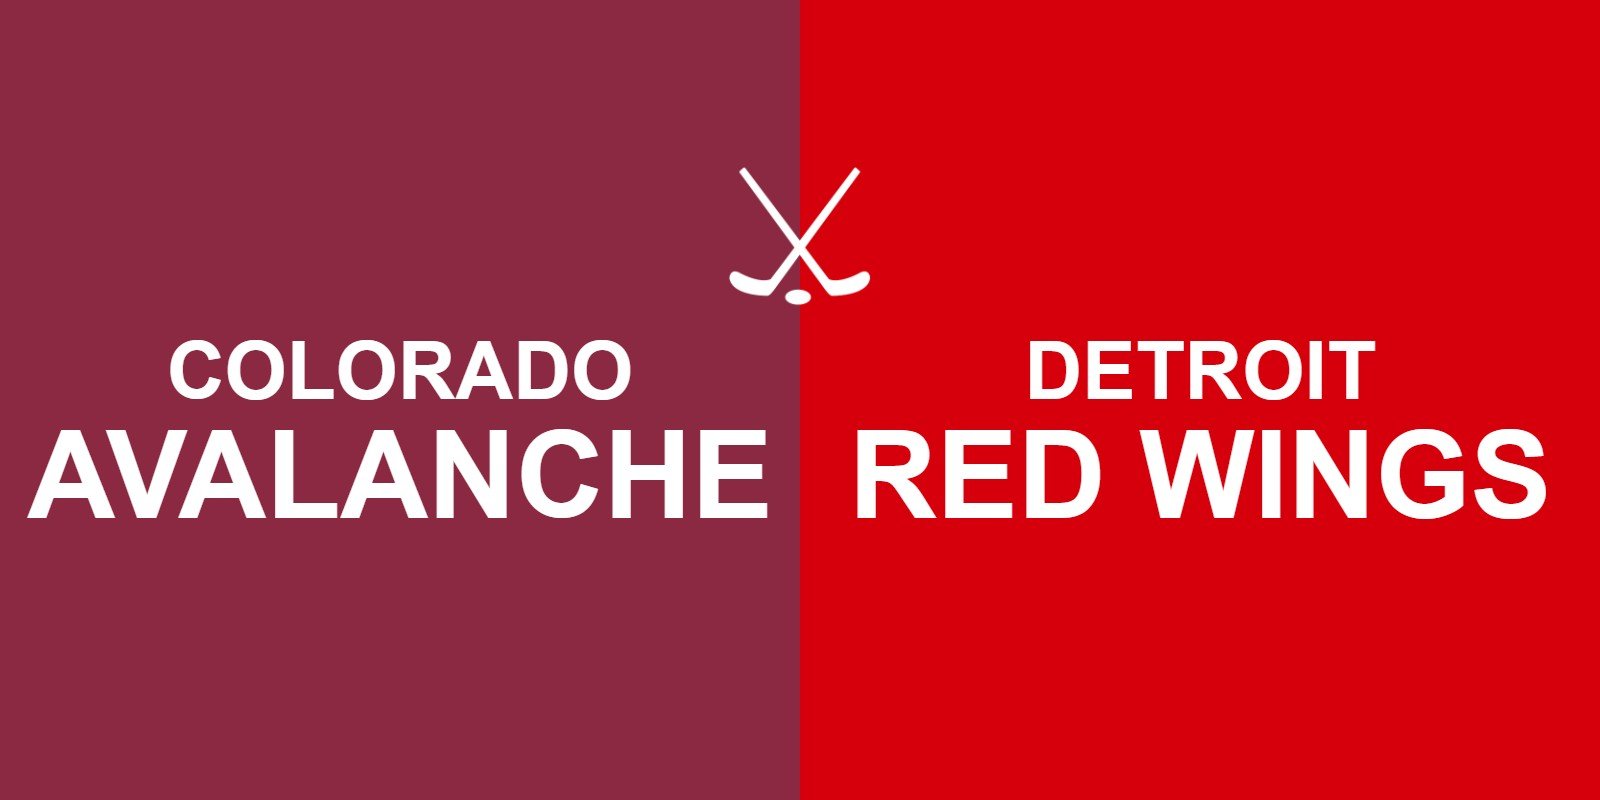 Avalanche vs Red Wings